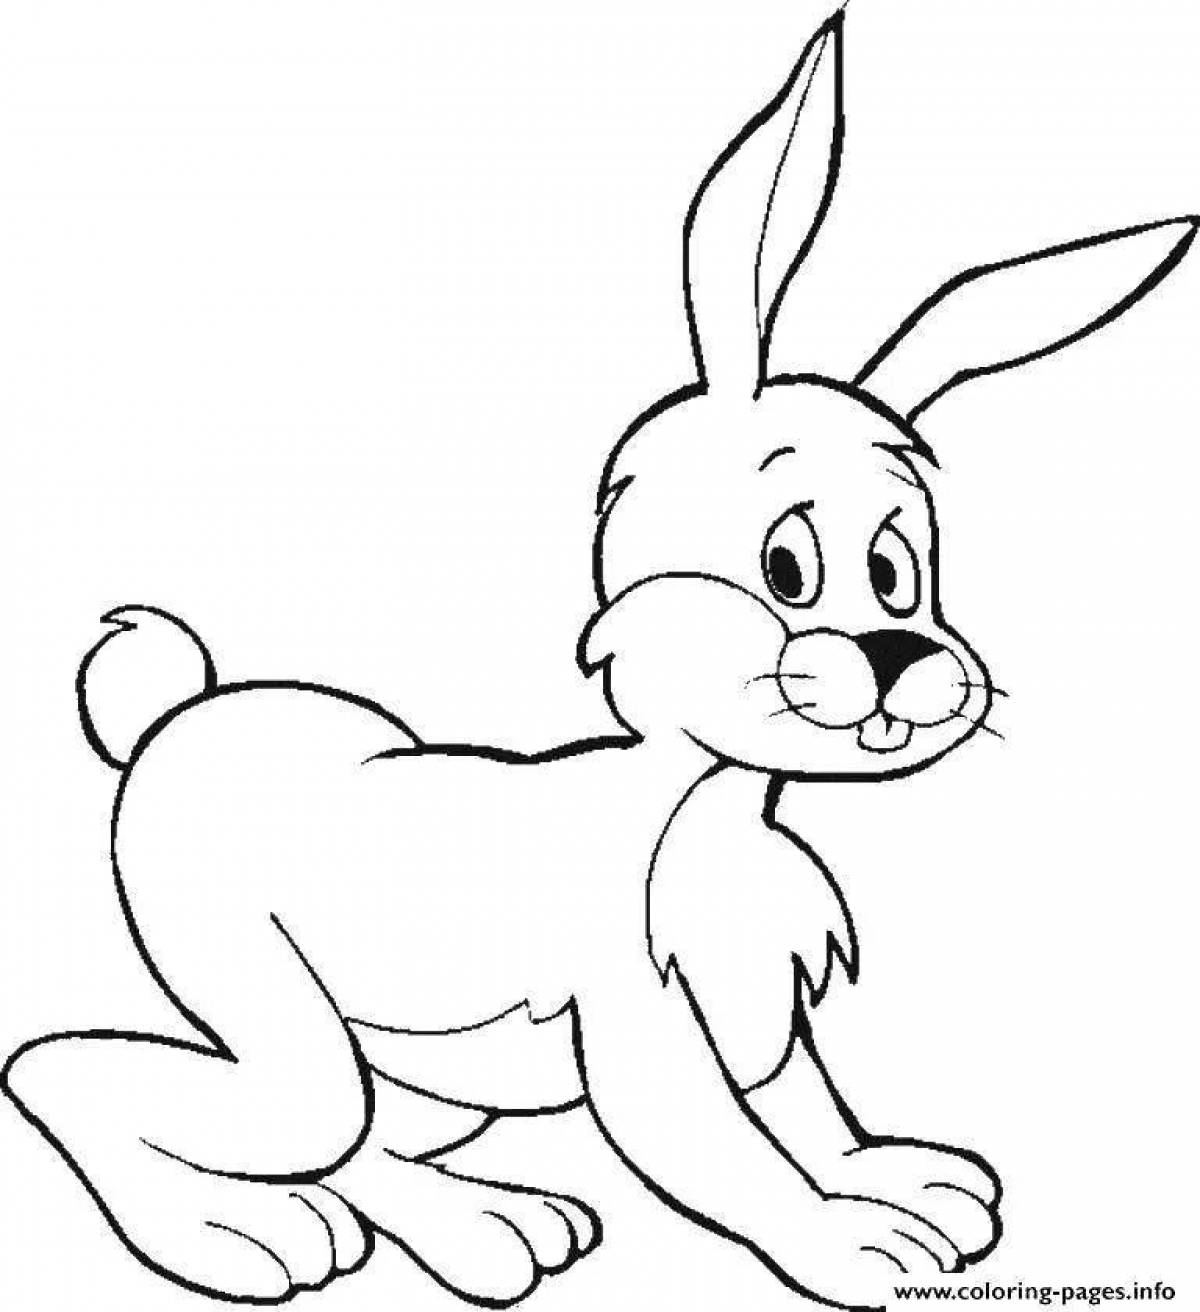 Magic coloring drawing of a hare for children